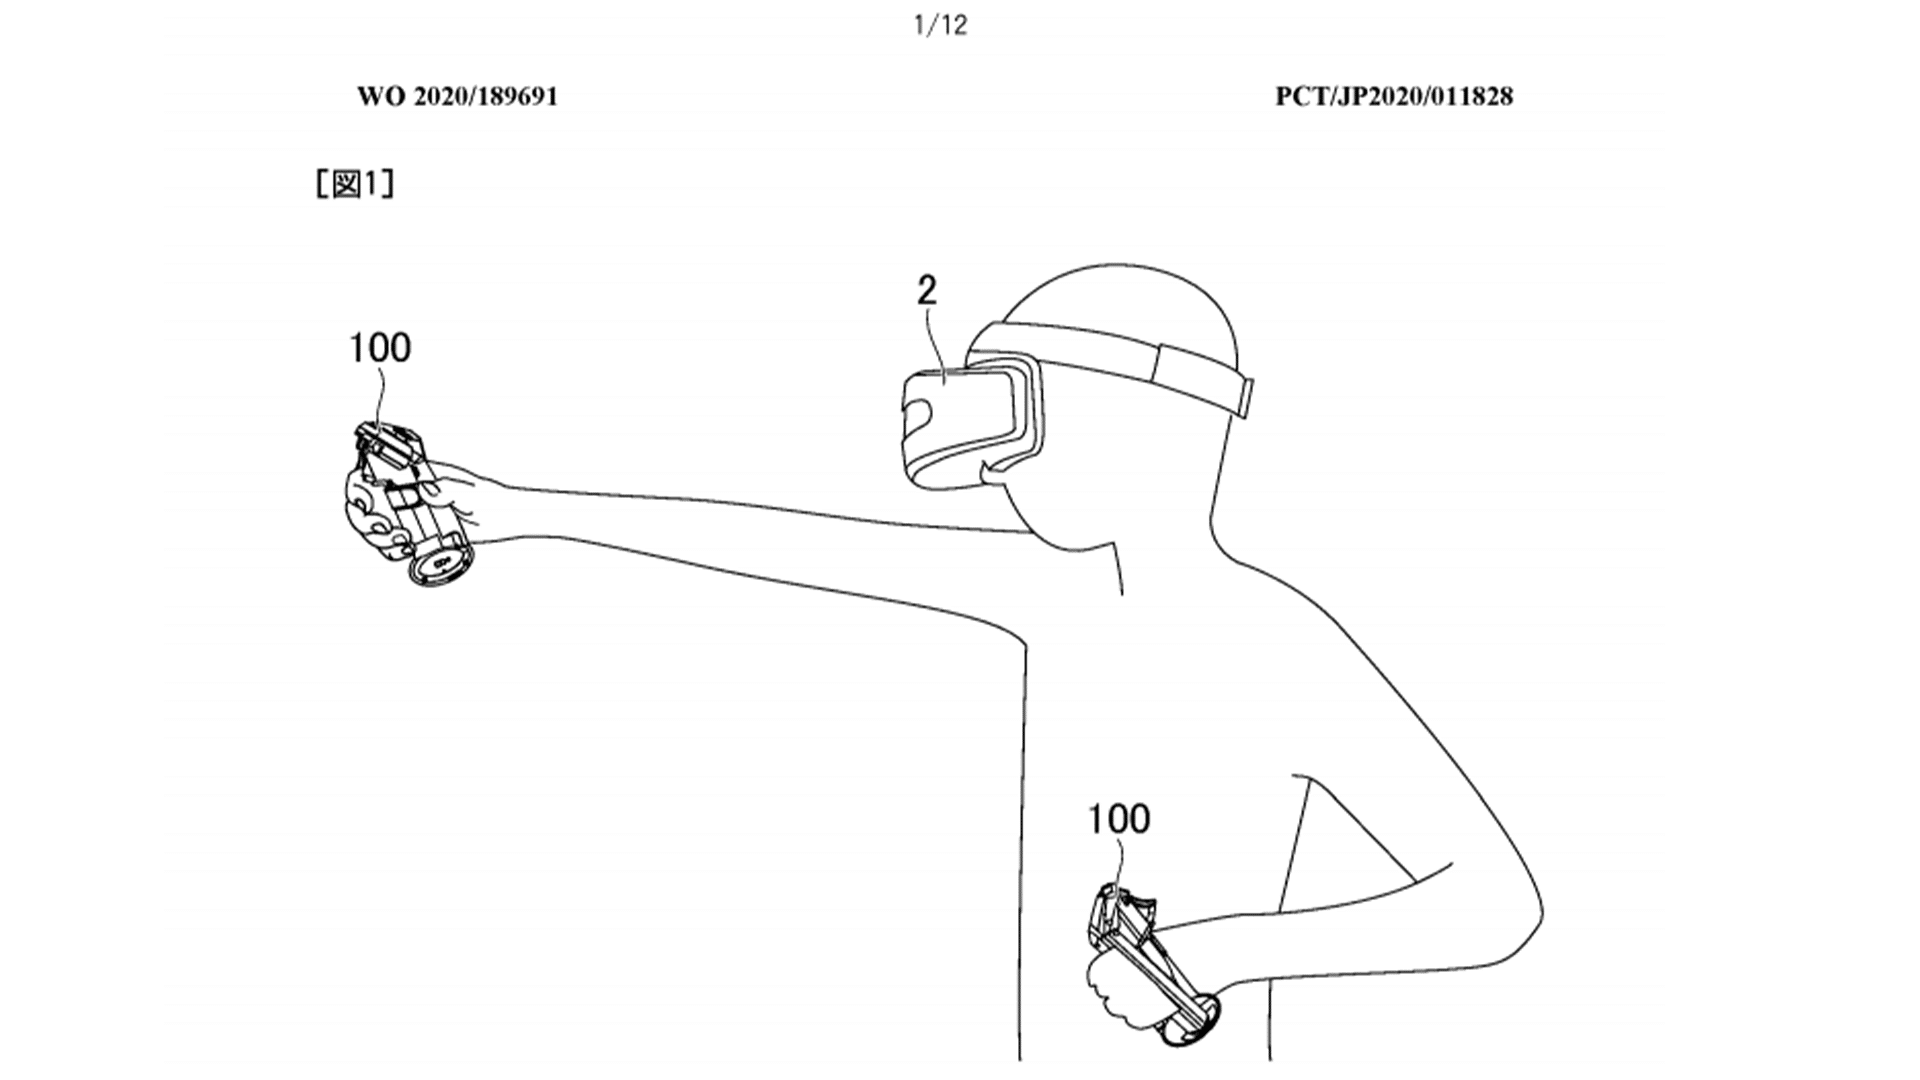 New PSVR Controllers Patent Diagram